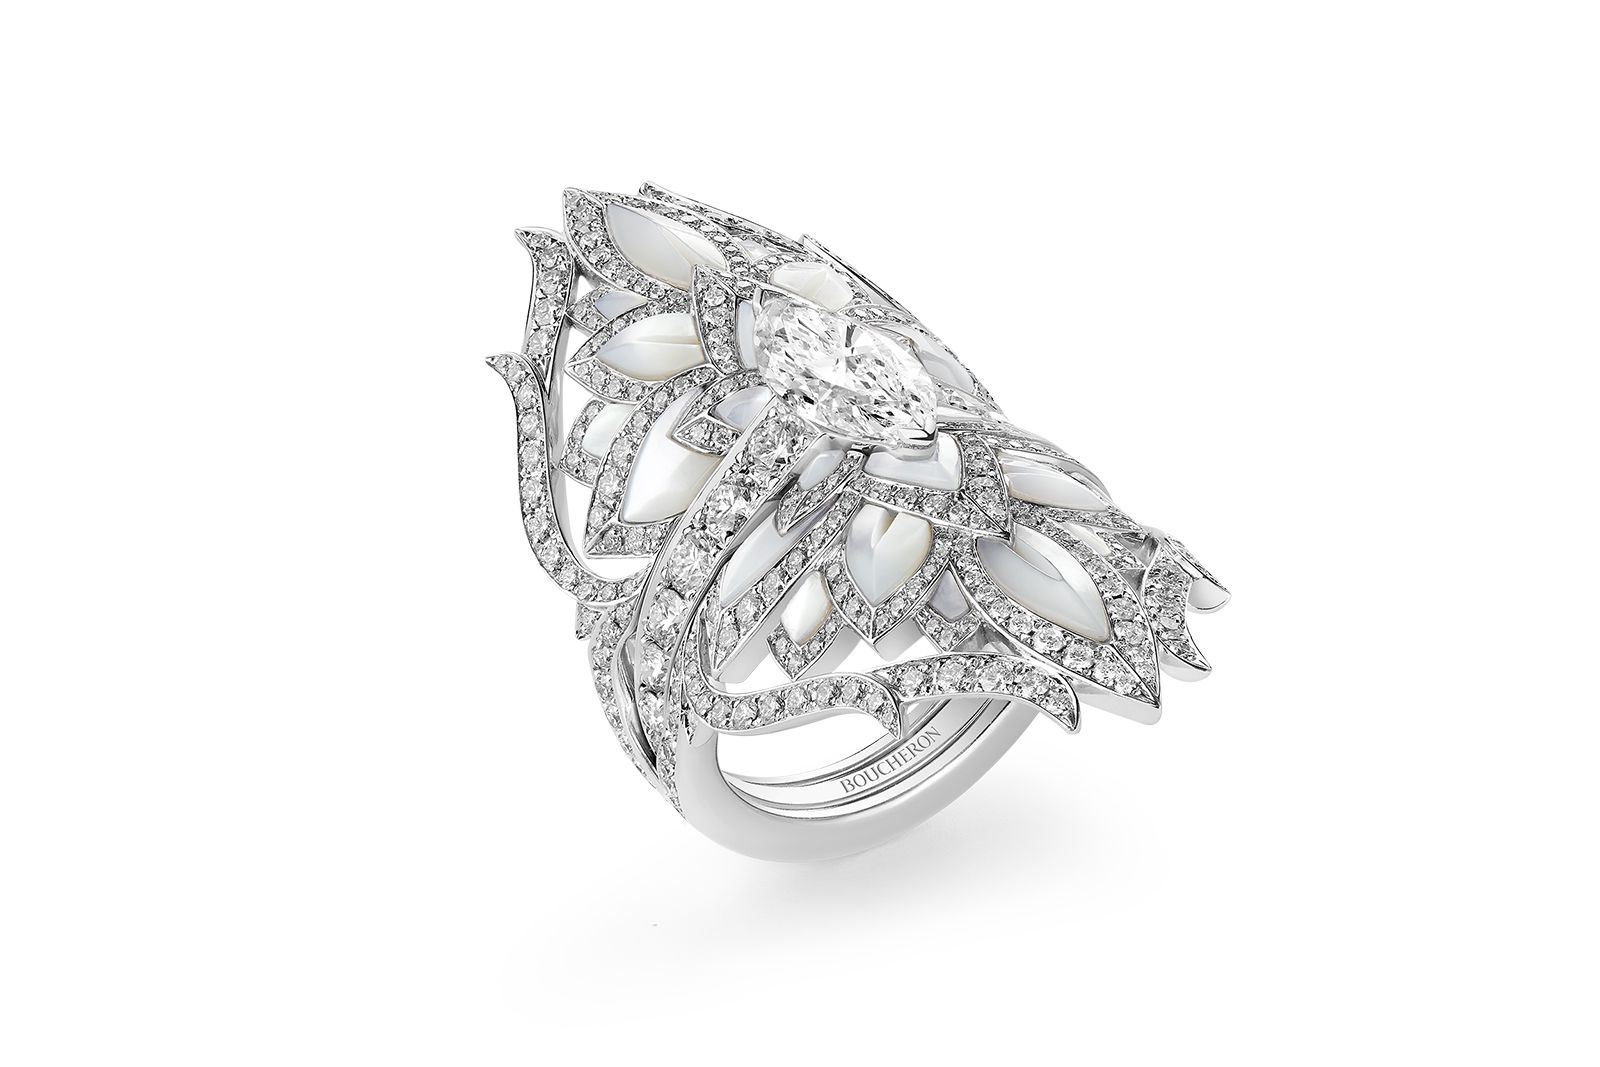 Boucheron New Maharani Nacre ring with diamonds and mother of pearl in white gold from the Histoire de Style New Maharajahs High Jewellery Collection